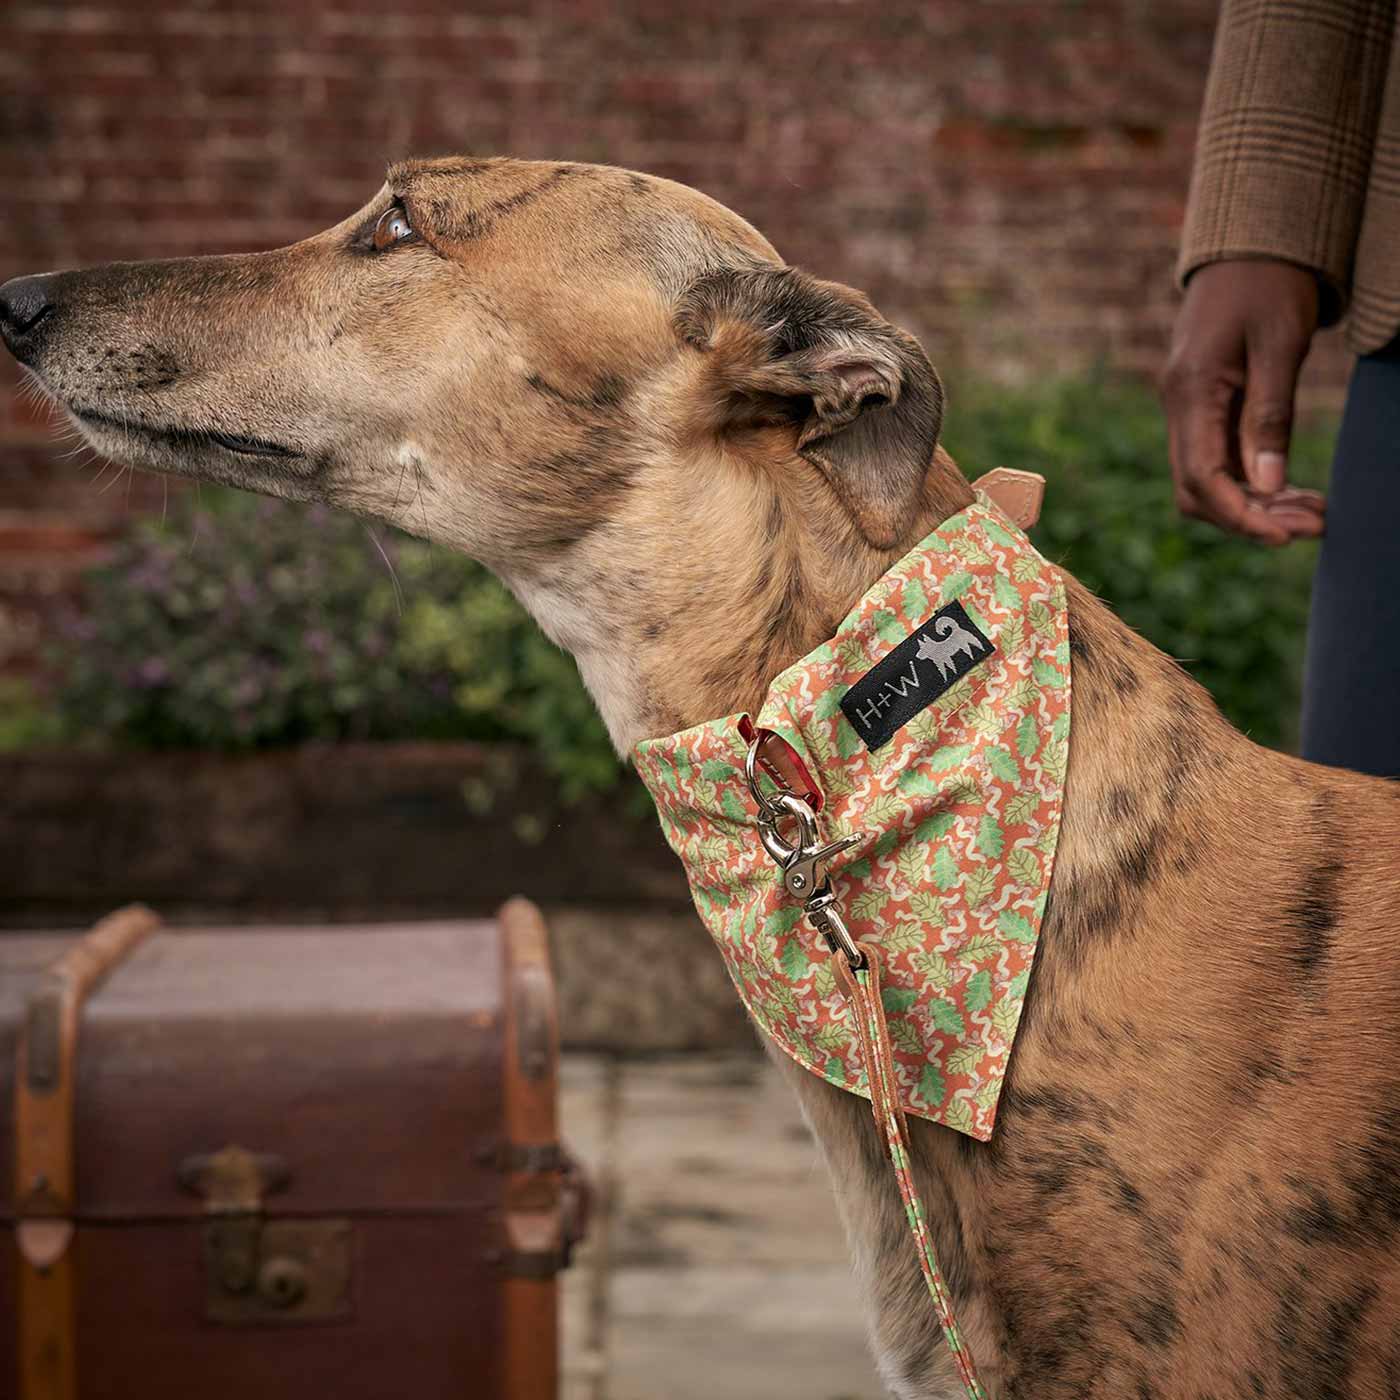 [colour:oak leaf] Set & accessorise your pooch ready for a stylish dog walk with Hiro + Wolf X L&L Dog Bandana, the perfect dog walking accessory! Made using strong webbing lining to provide extra strength! Available in 3 stylish designs and 2 sizes at Lords & Labradors